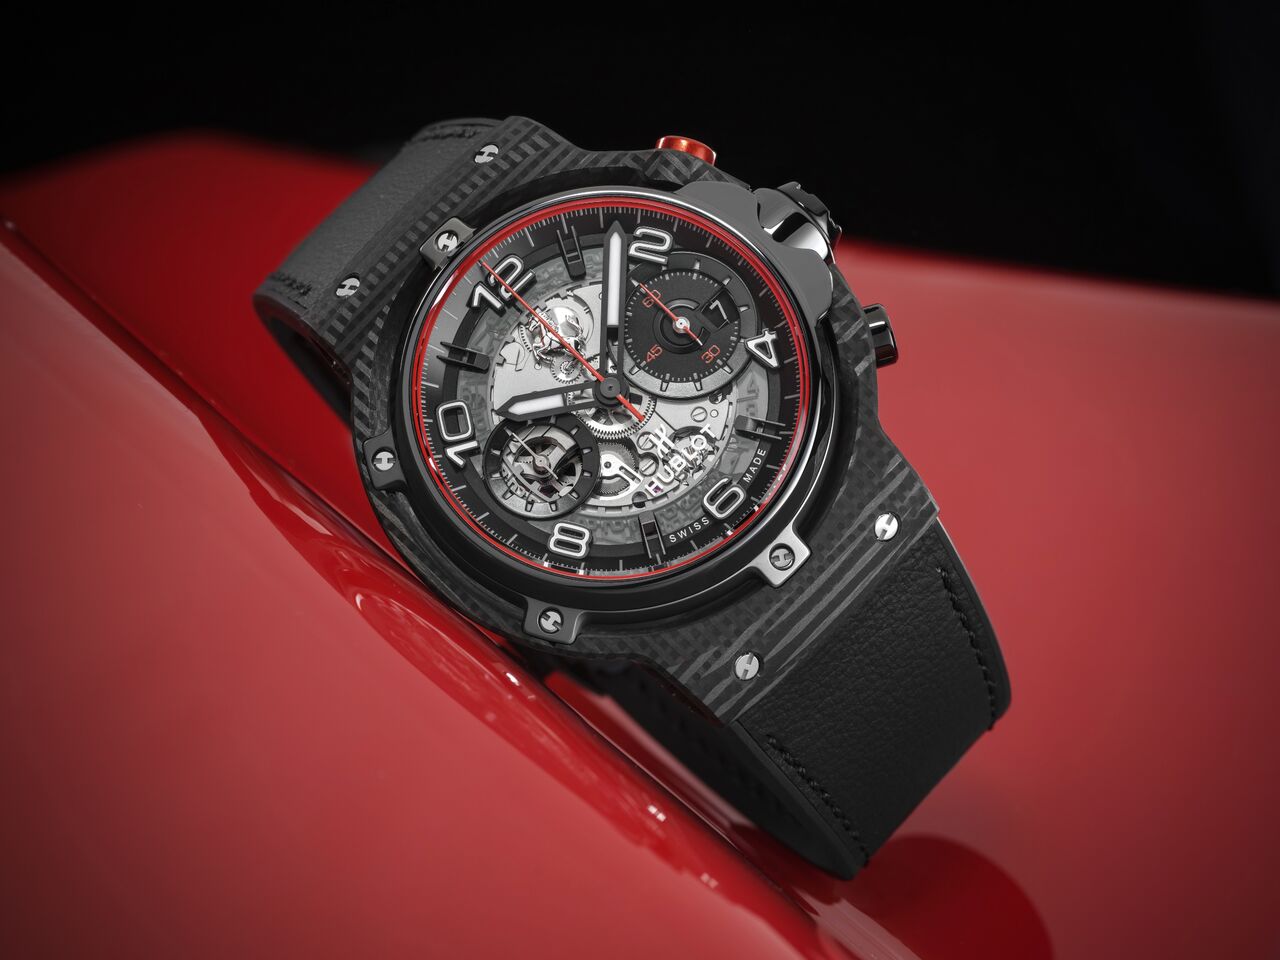 Hublot Is Kicking Off Baselworld 2019 In High Gear!